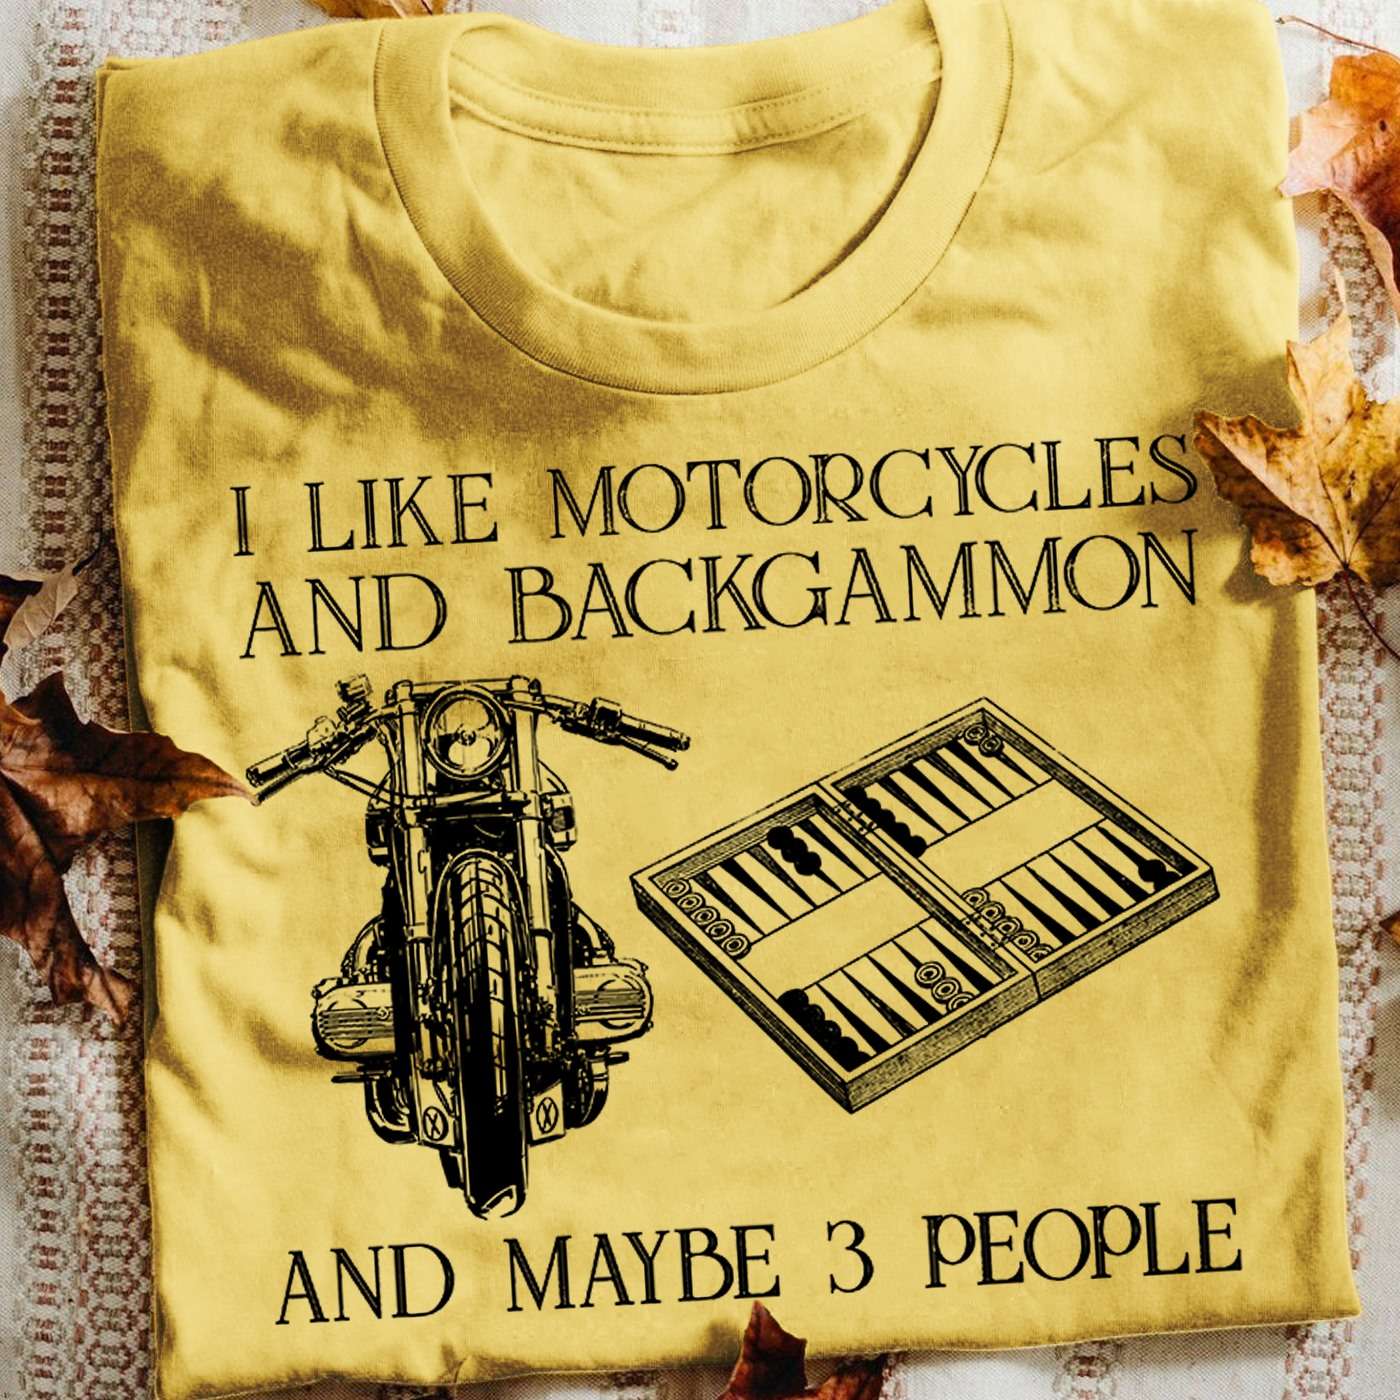 I like motorcycles and backgammon and maybe 3 people - Motorcycle person